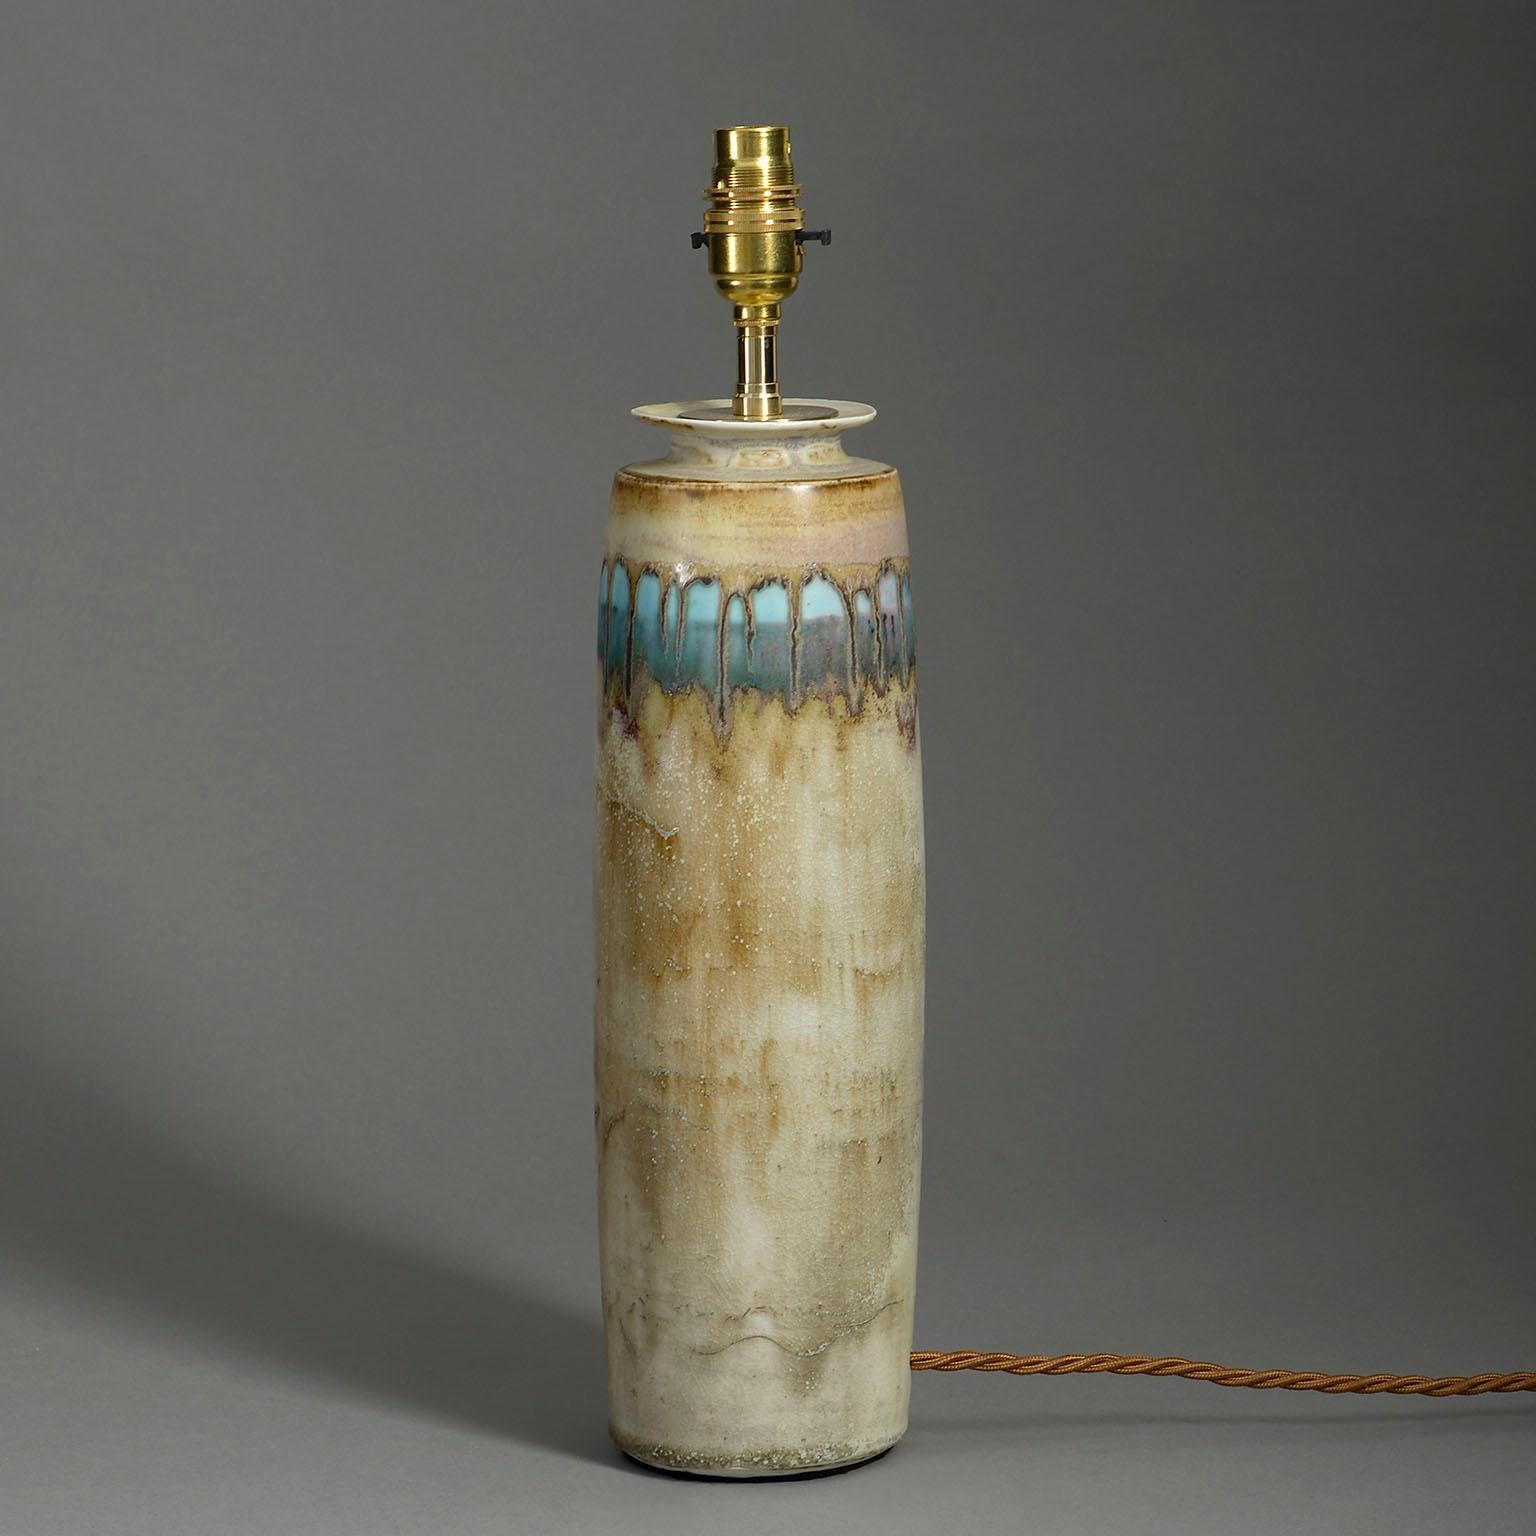 A mid-twentieth century studio pottery vase of cylindrical form, with turquoise glazed collar upon a caramel ground. Now mounted as a lamp.

Dimensions refer to ceramic vase part only.

Wired to UK standards. This lamp can be rewired to all